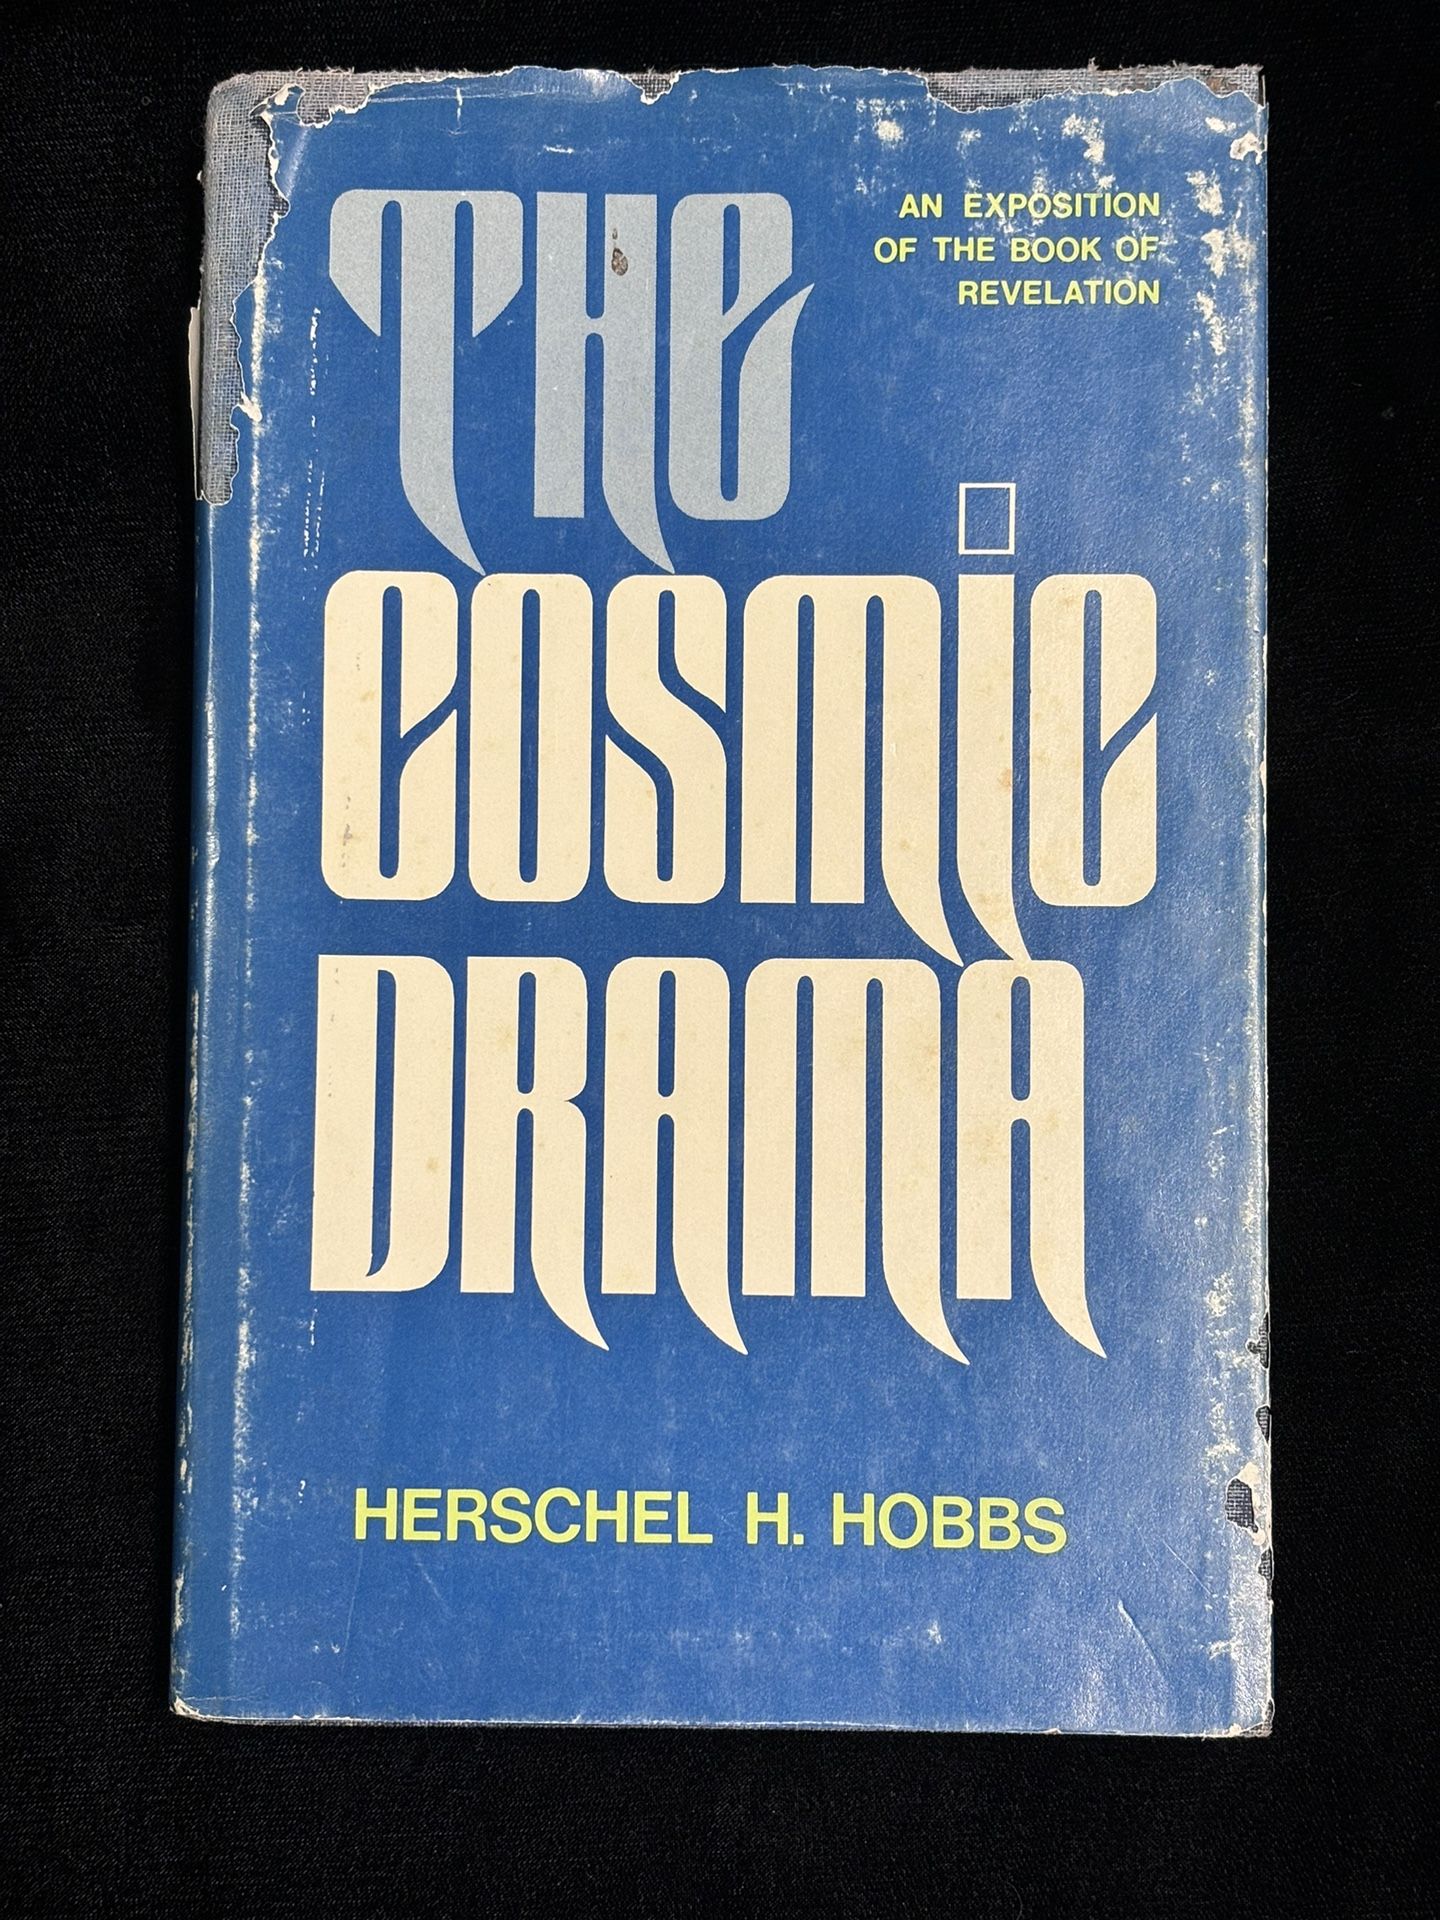 The Cosmic Drama by Herschel H. Hobbs 1971 Exposition on the Book of Revelation